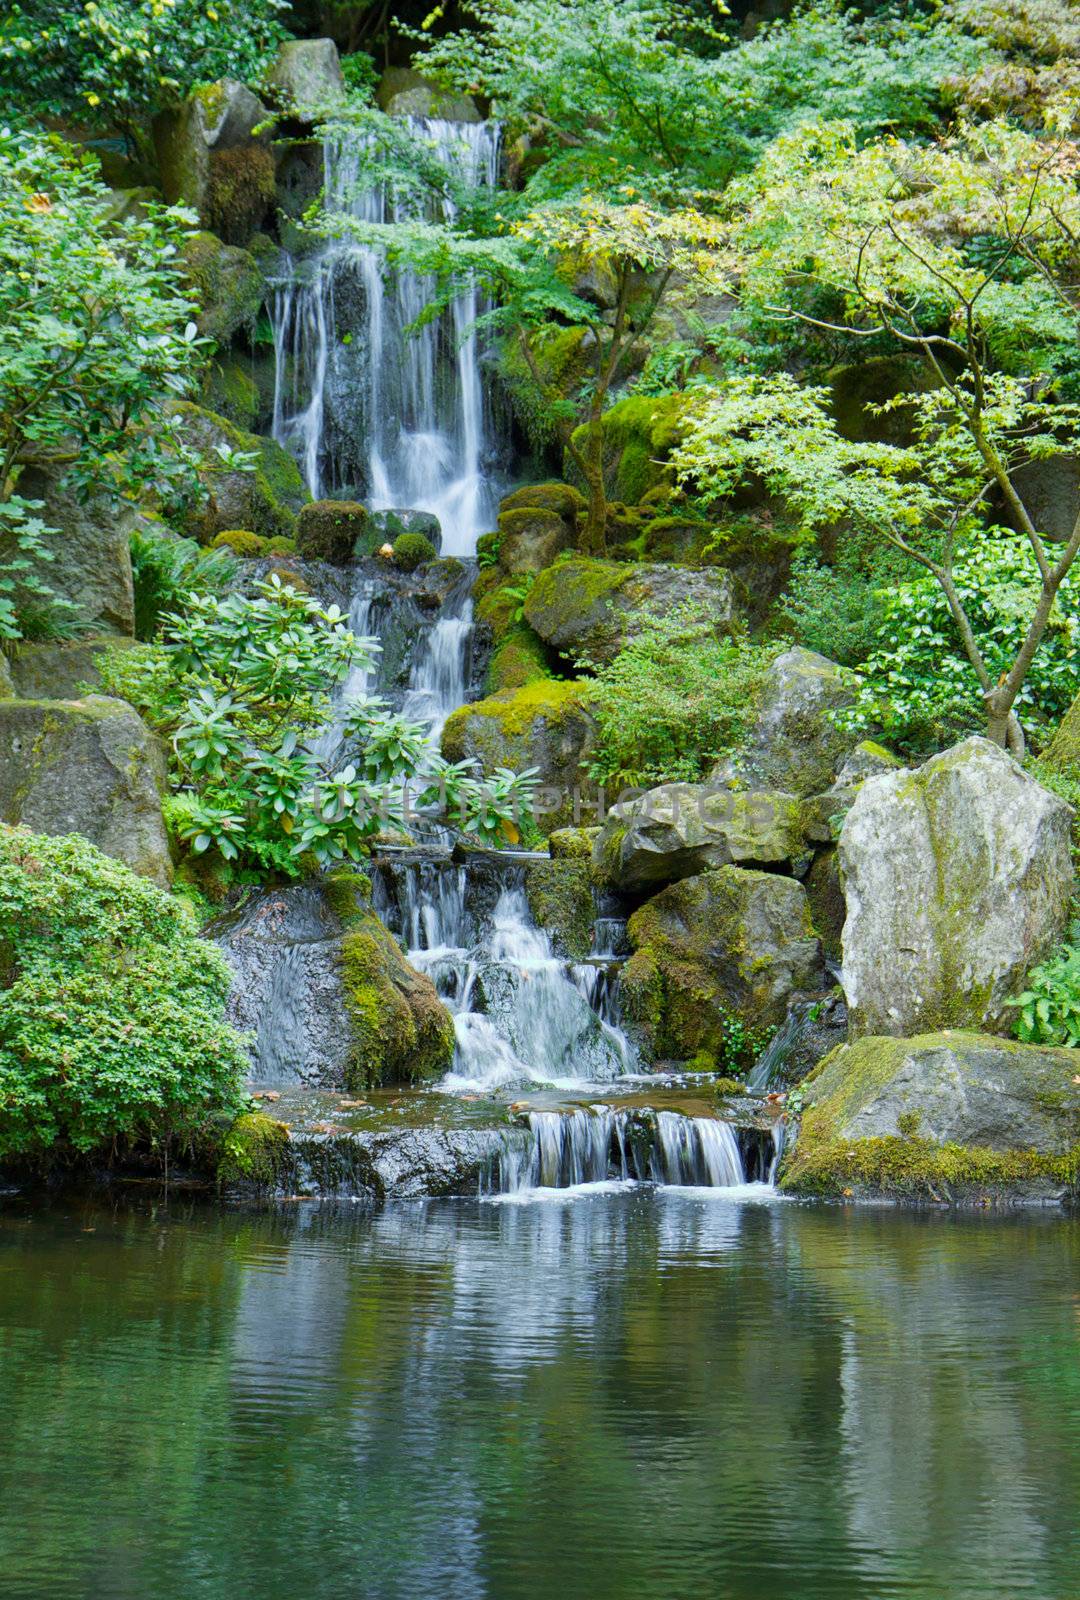 Japanese garden waterfall emptying into green pond